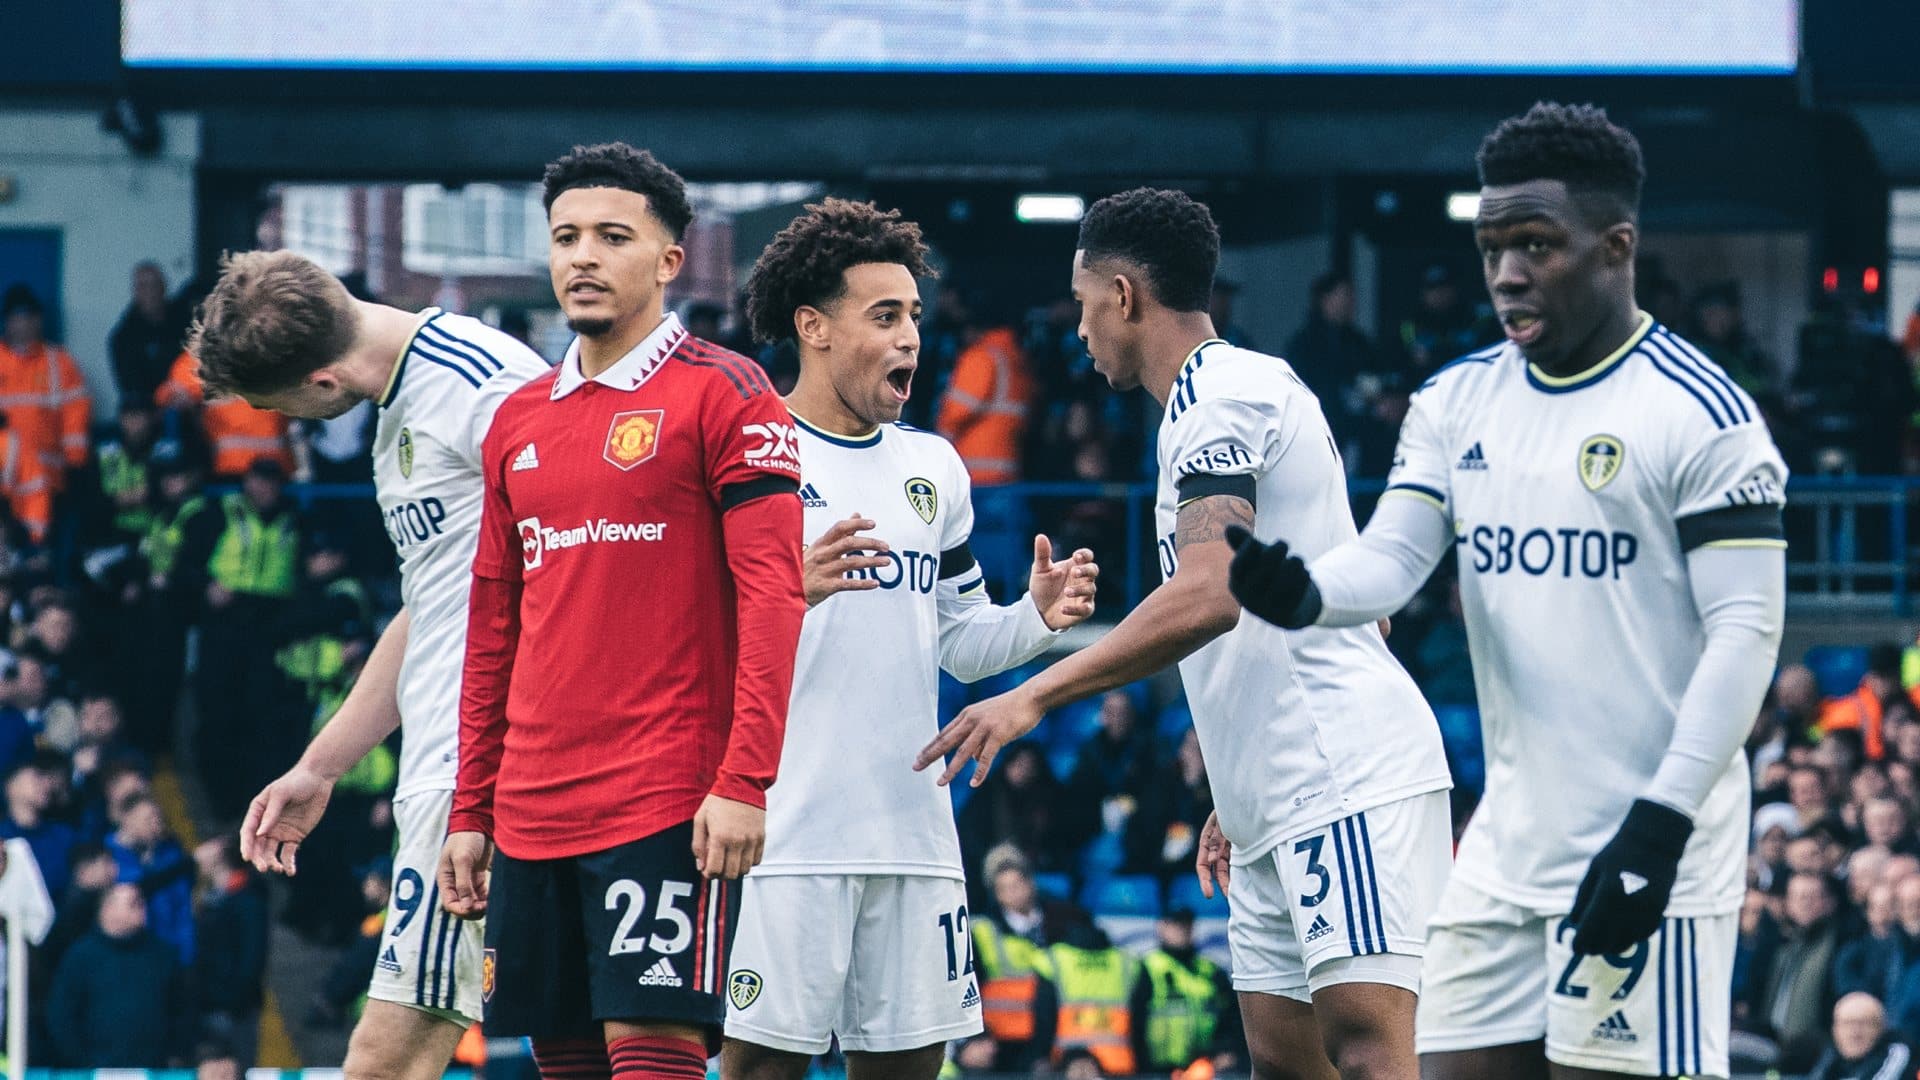 Tyler Adams looks shocked by a joke Junior Firpo has just told him. They're supposed to be taking a free-kick so maybe Firps just suggested shooting or something